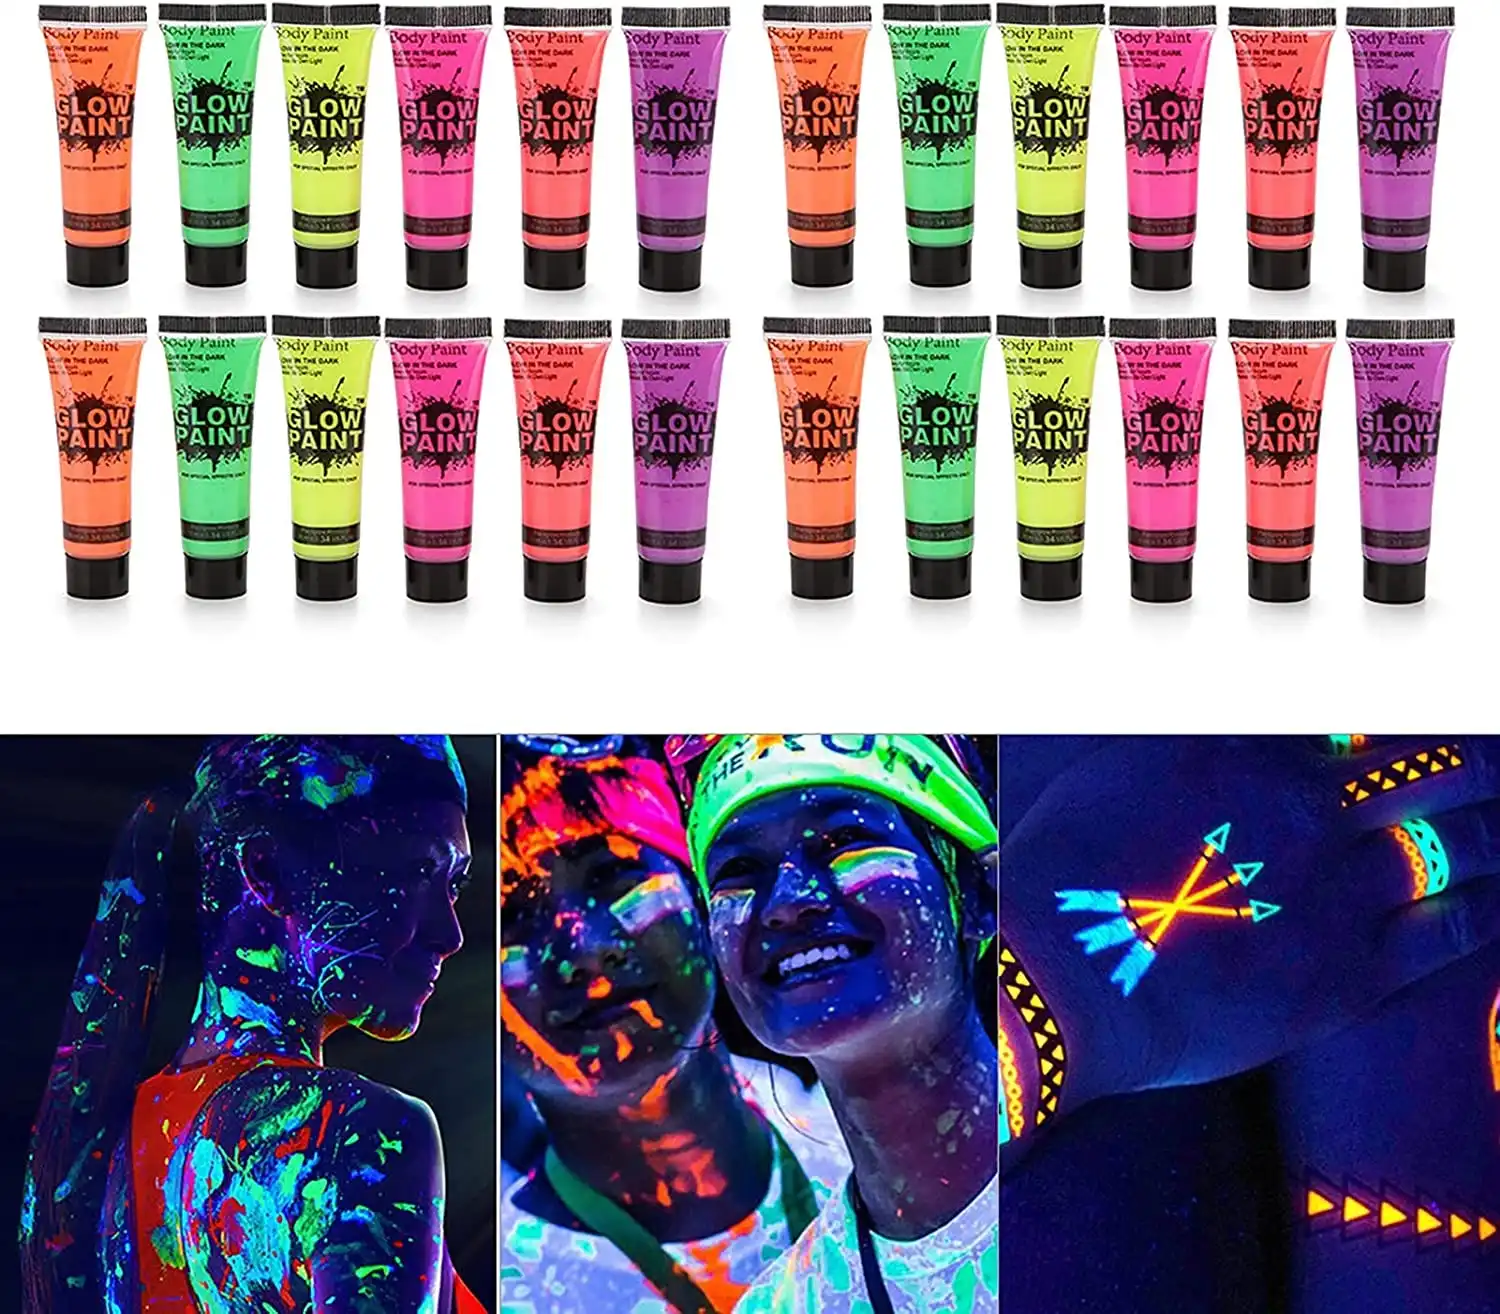 24 Tubes 25ml Art Body Paint Glow inLight Face & Body Paint with 6 Colors Glow Blacklight Neon Fluorescent for Party Clubbing Festival Halloween Makeup